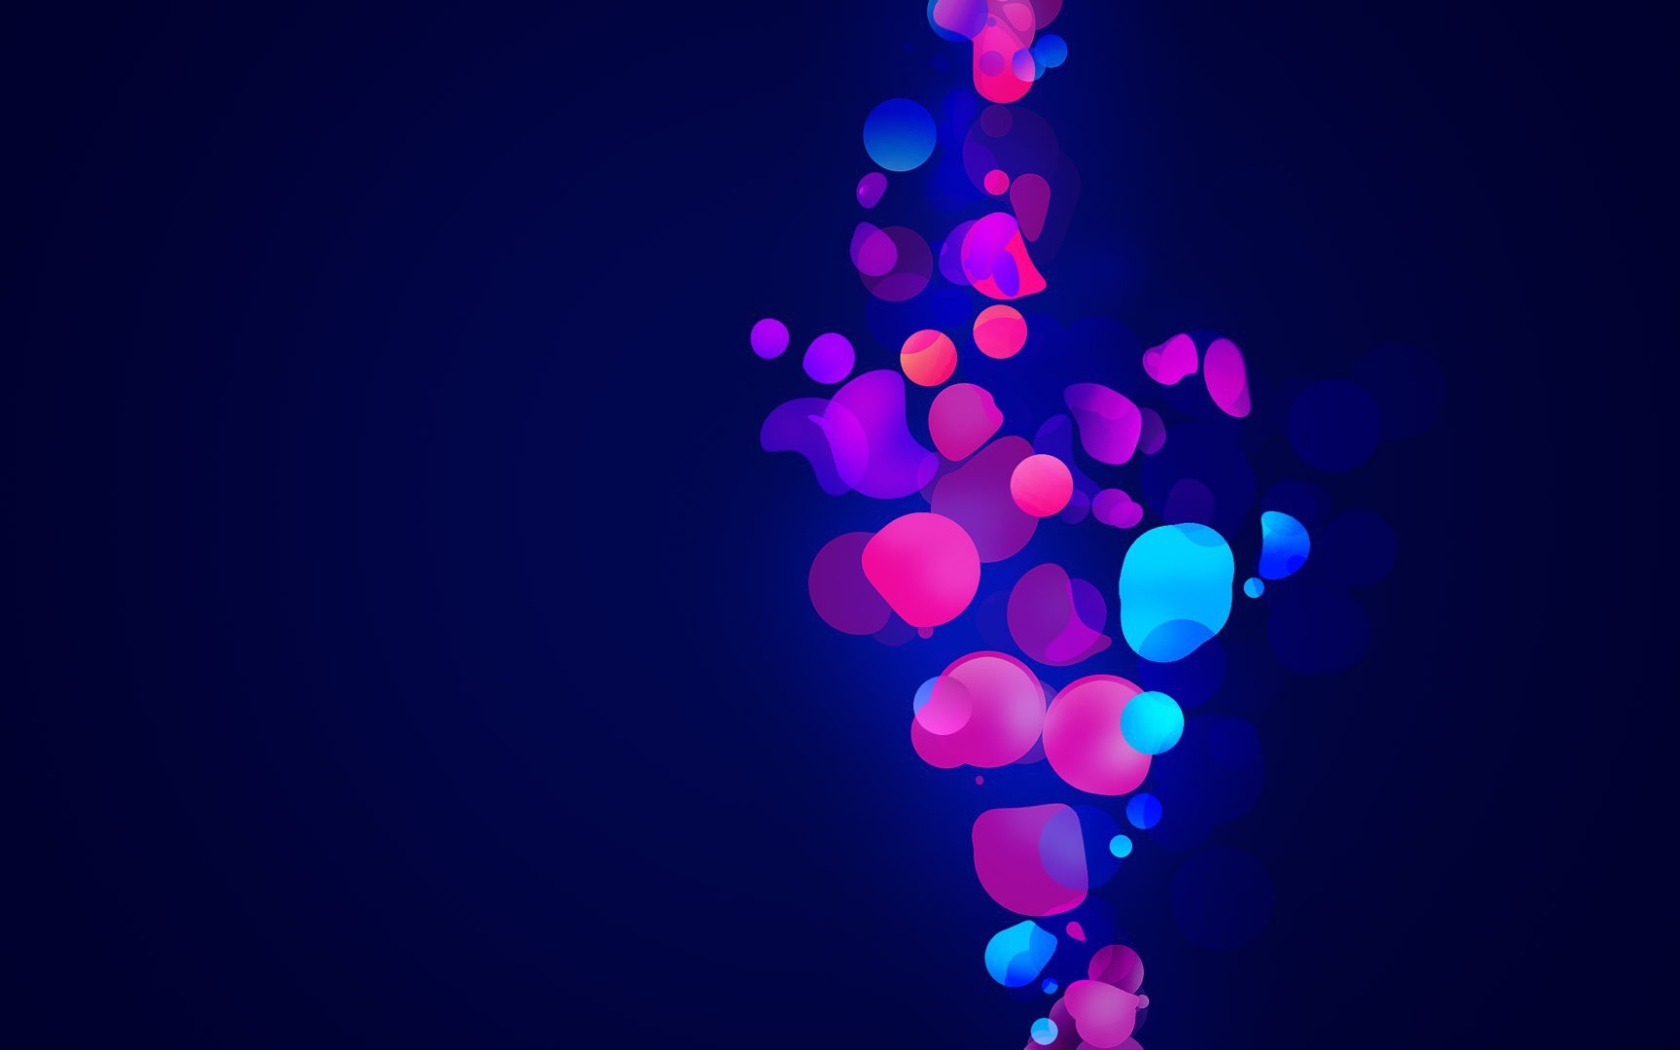 Abstract pink and blue shapes on a blue background